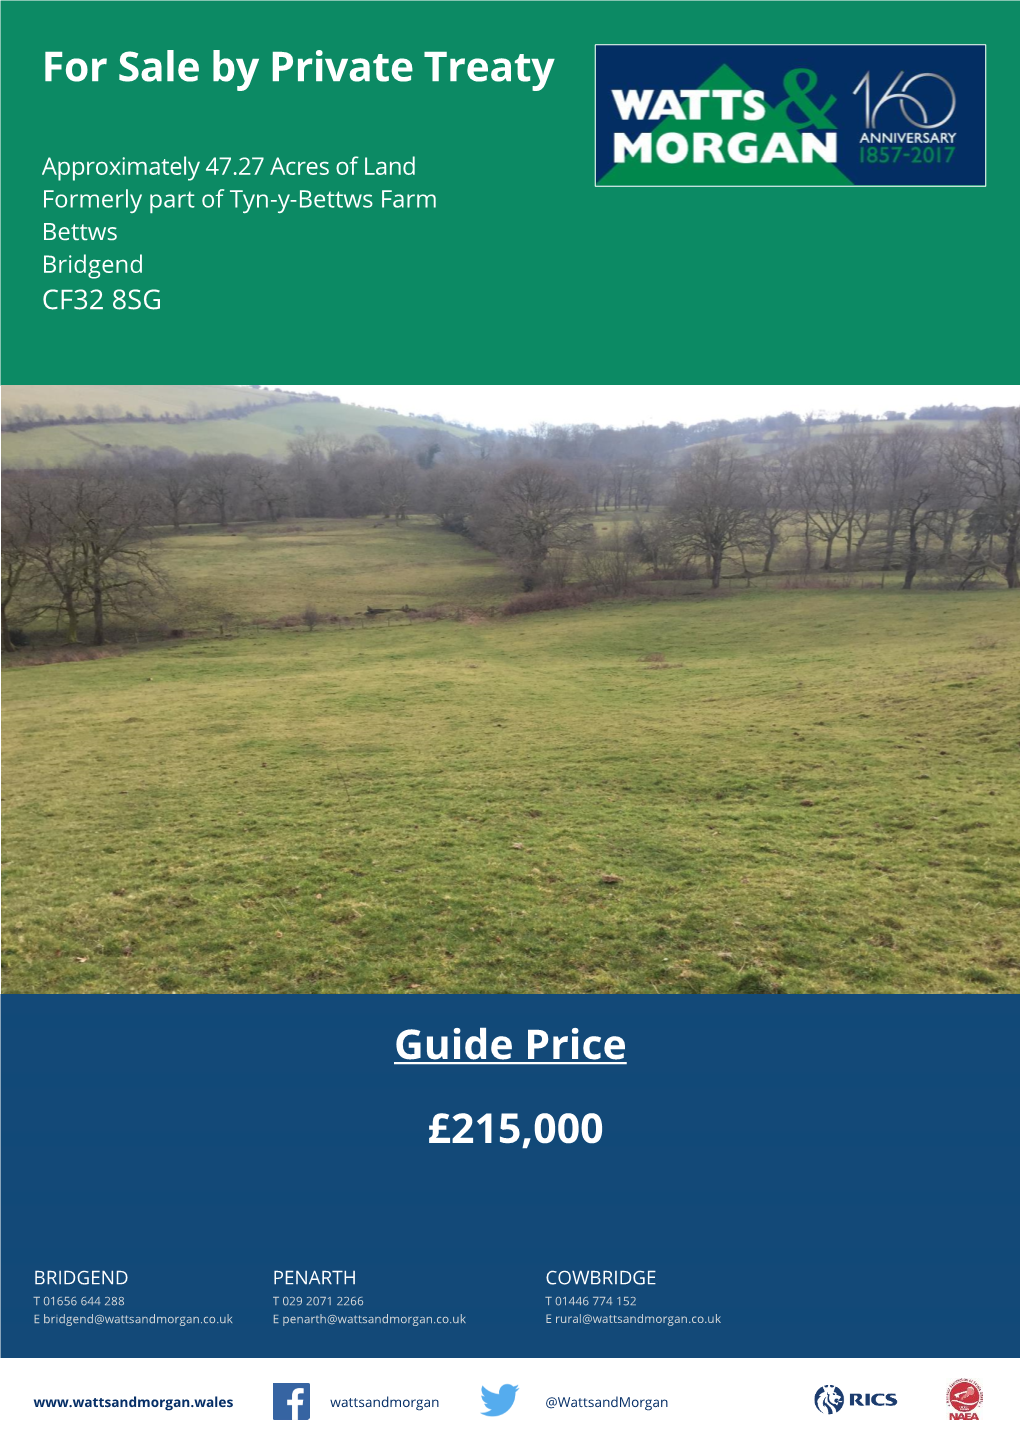 For Sale by Private Treaty Guide Price £215,000